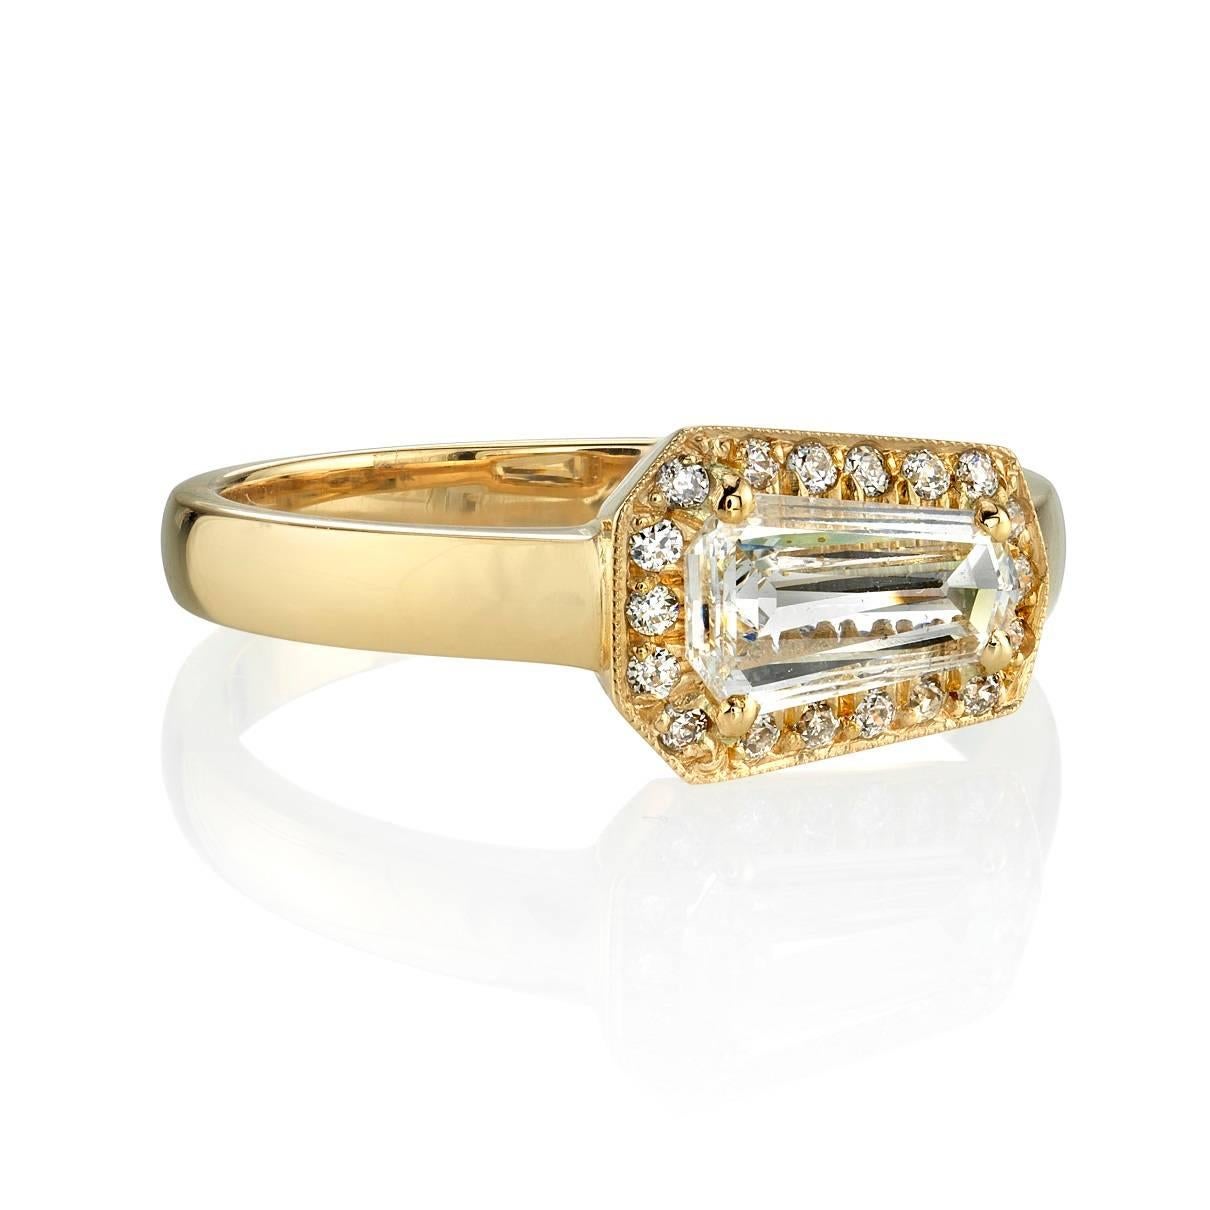 0.47ct F/SI1 EGL certified Shield cut diamond set in a handcrafted 18k yellow gold mounting. This bold engagement ring features a unique center stone and a striking profile.